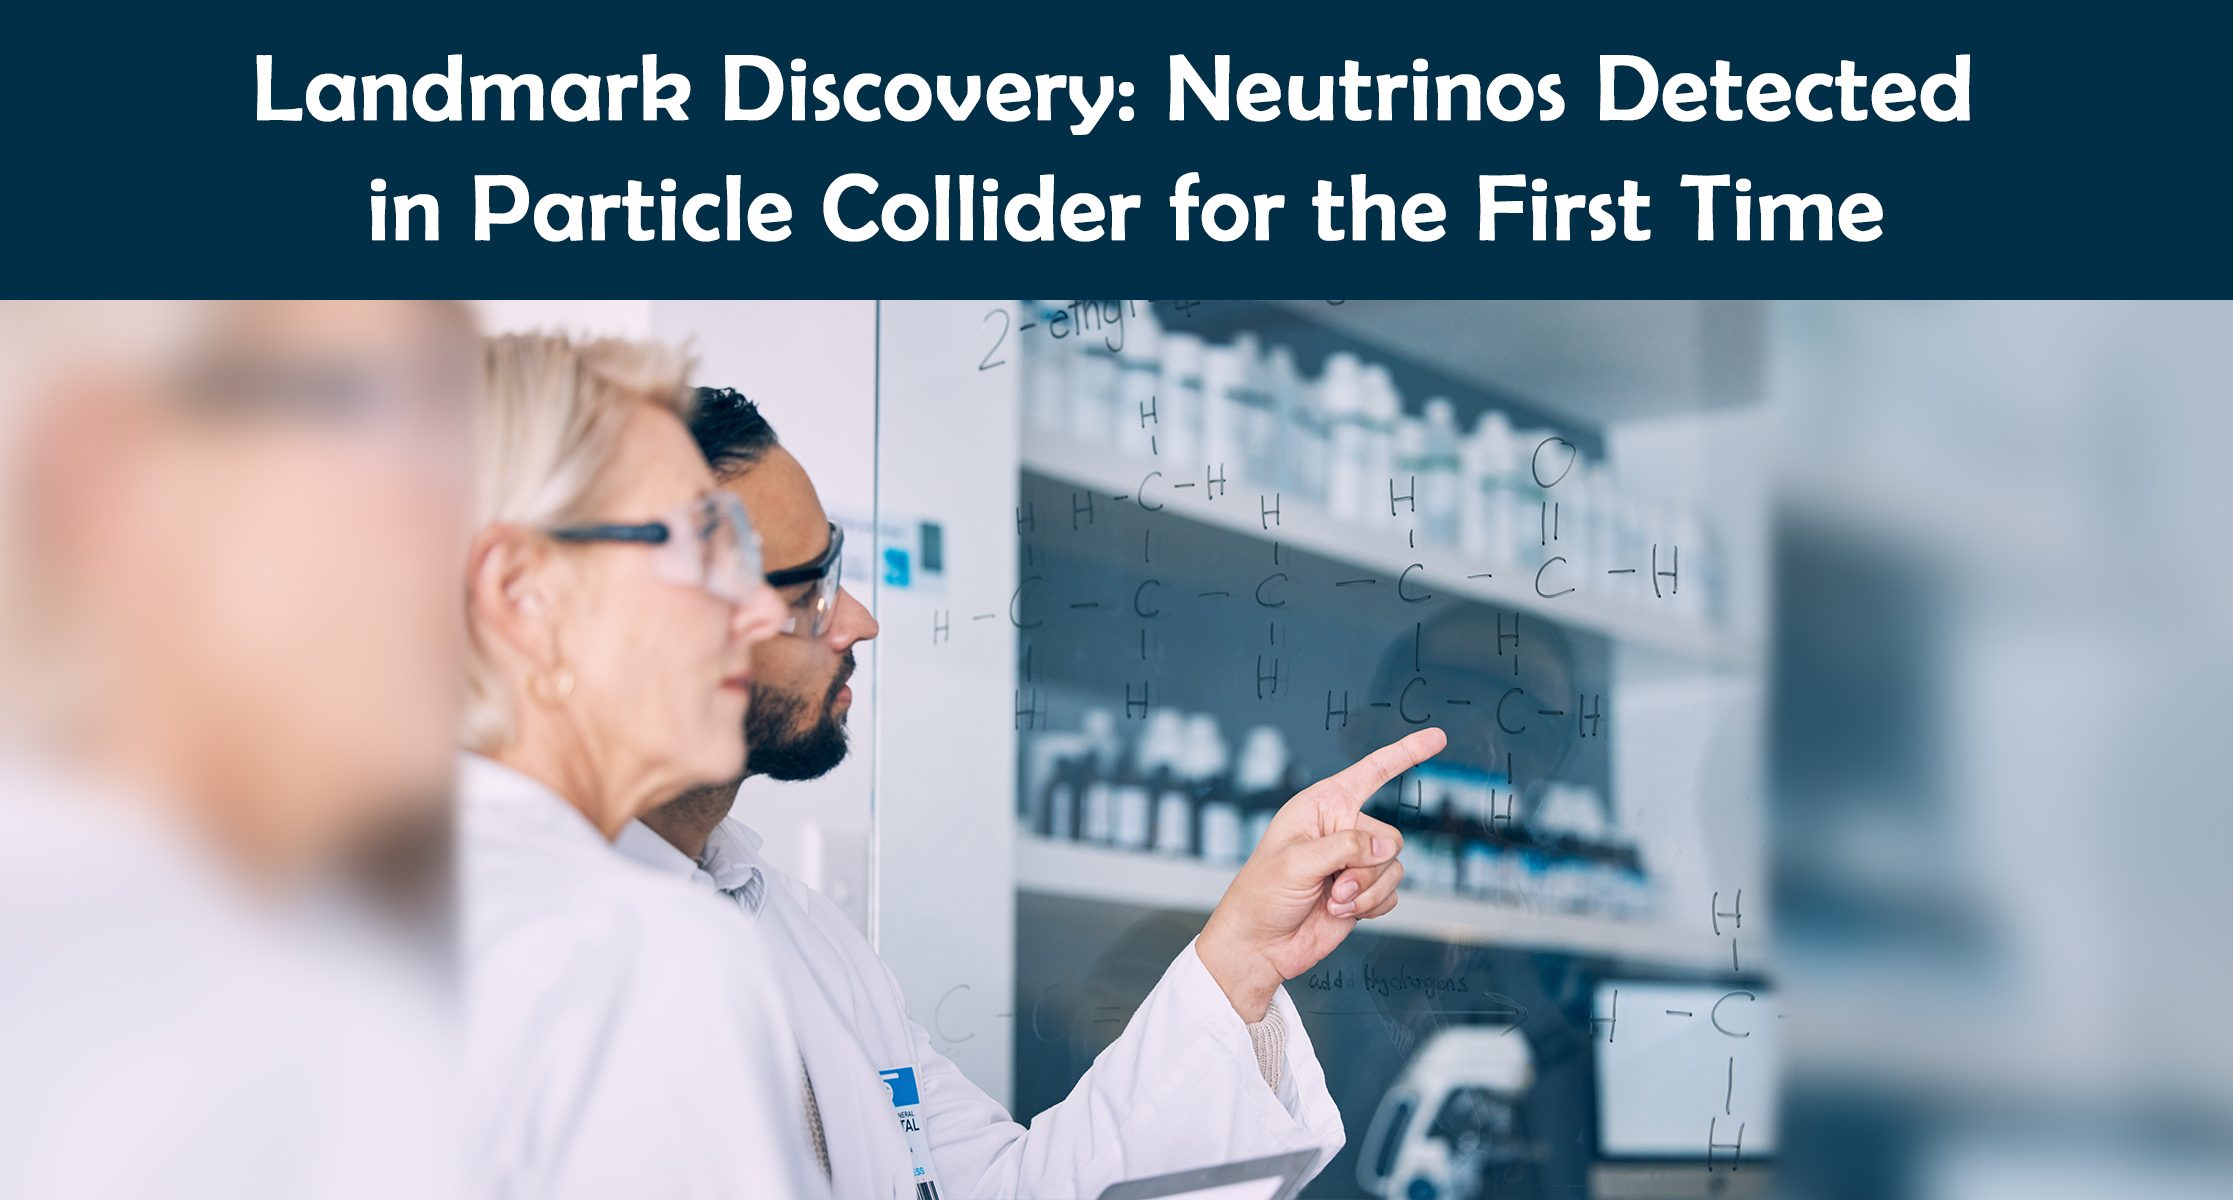 Landmark Discovery: Neutrinos Detected in Particle Collider for the First Time